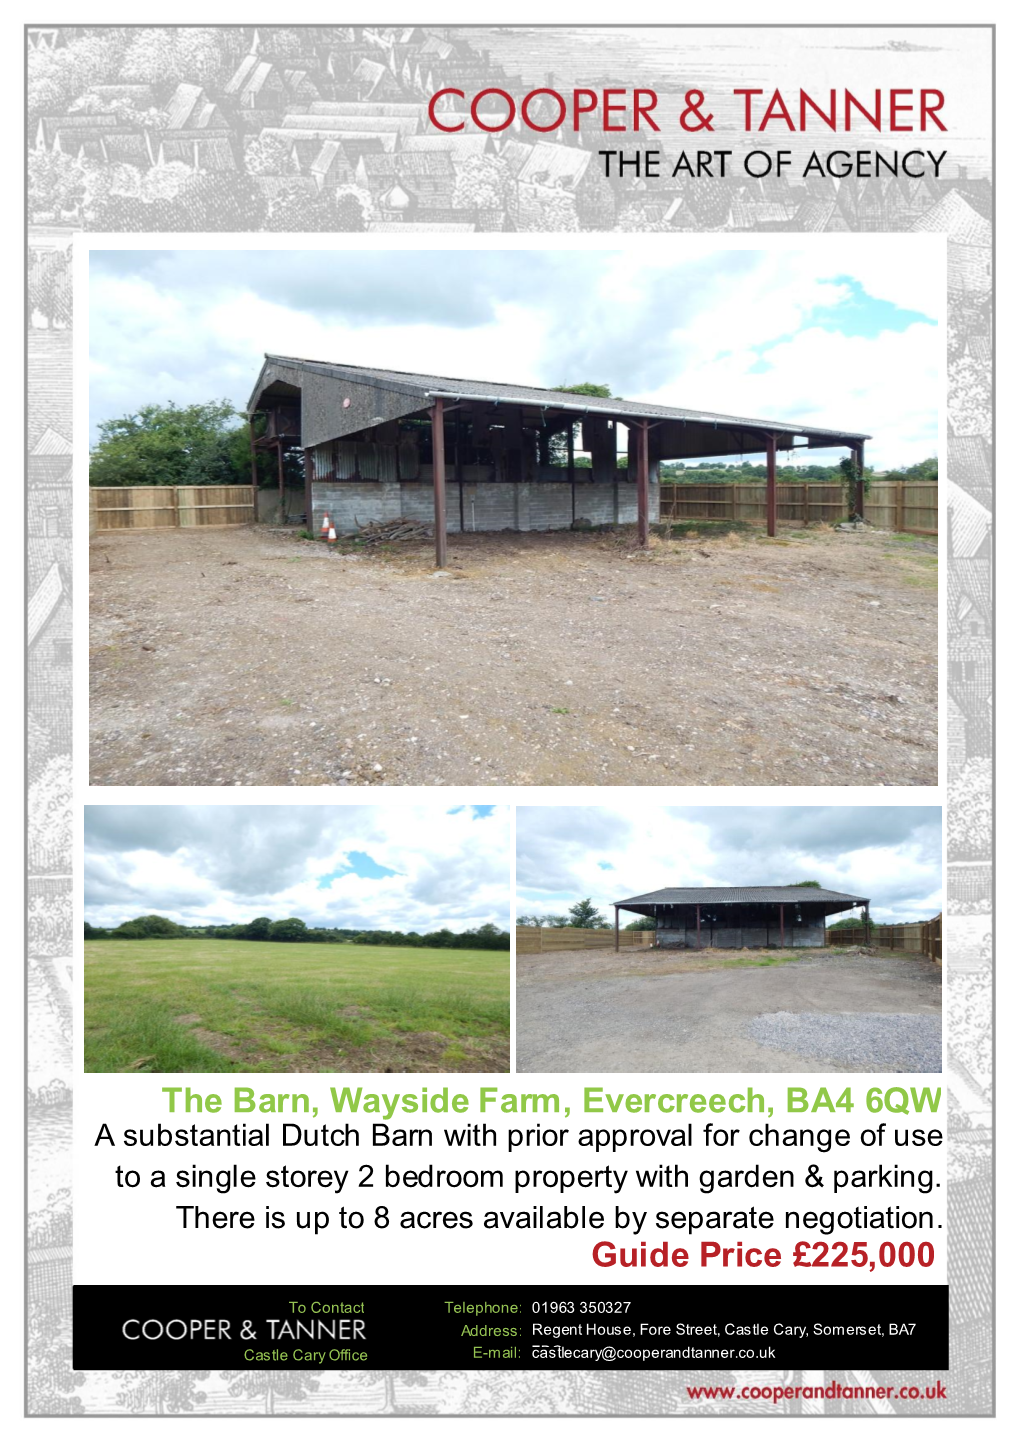 The Barn, Wayside Farm, Evercreech, BA4 6QW a Substantial Dutch Barn with Prior Approval for Change of Use to a Single Storey 2 Bedroom Property with Garden & Parking